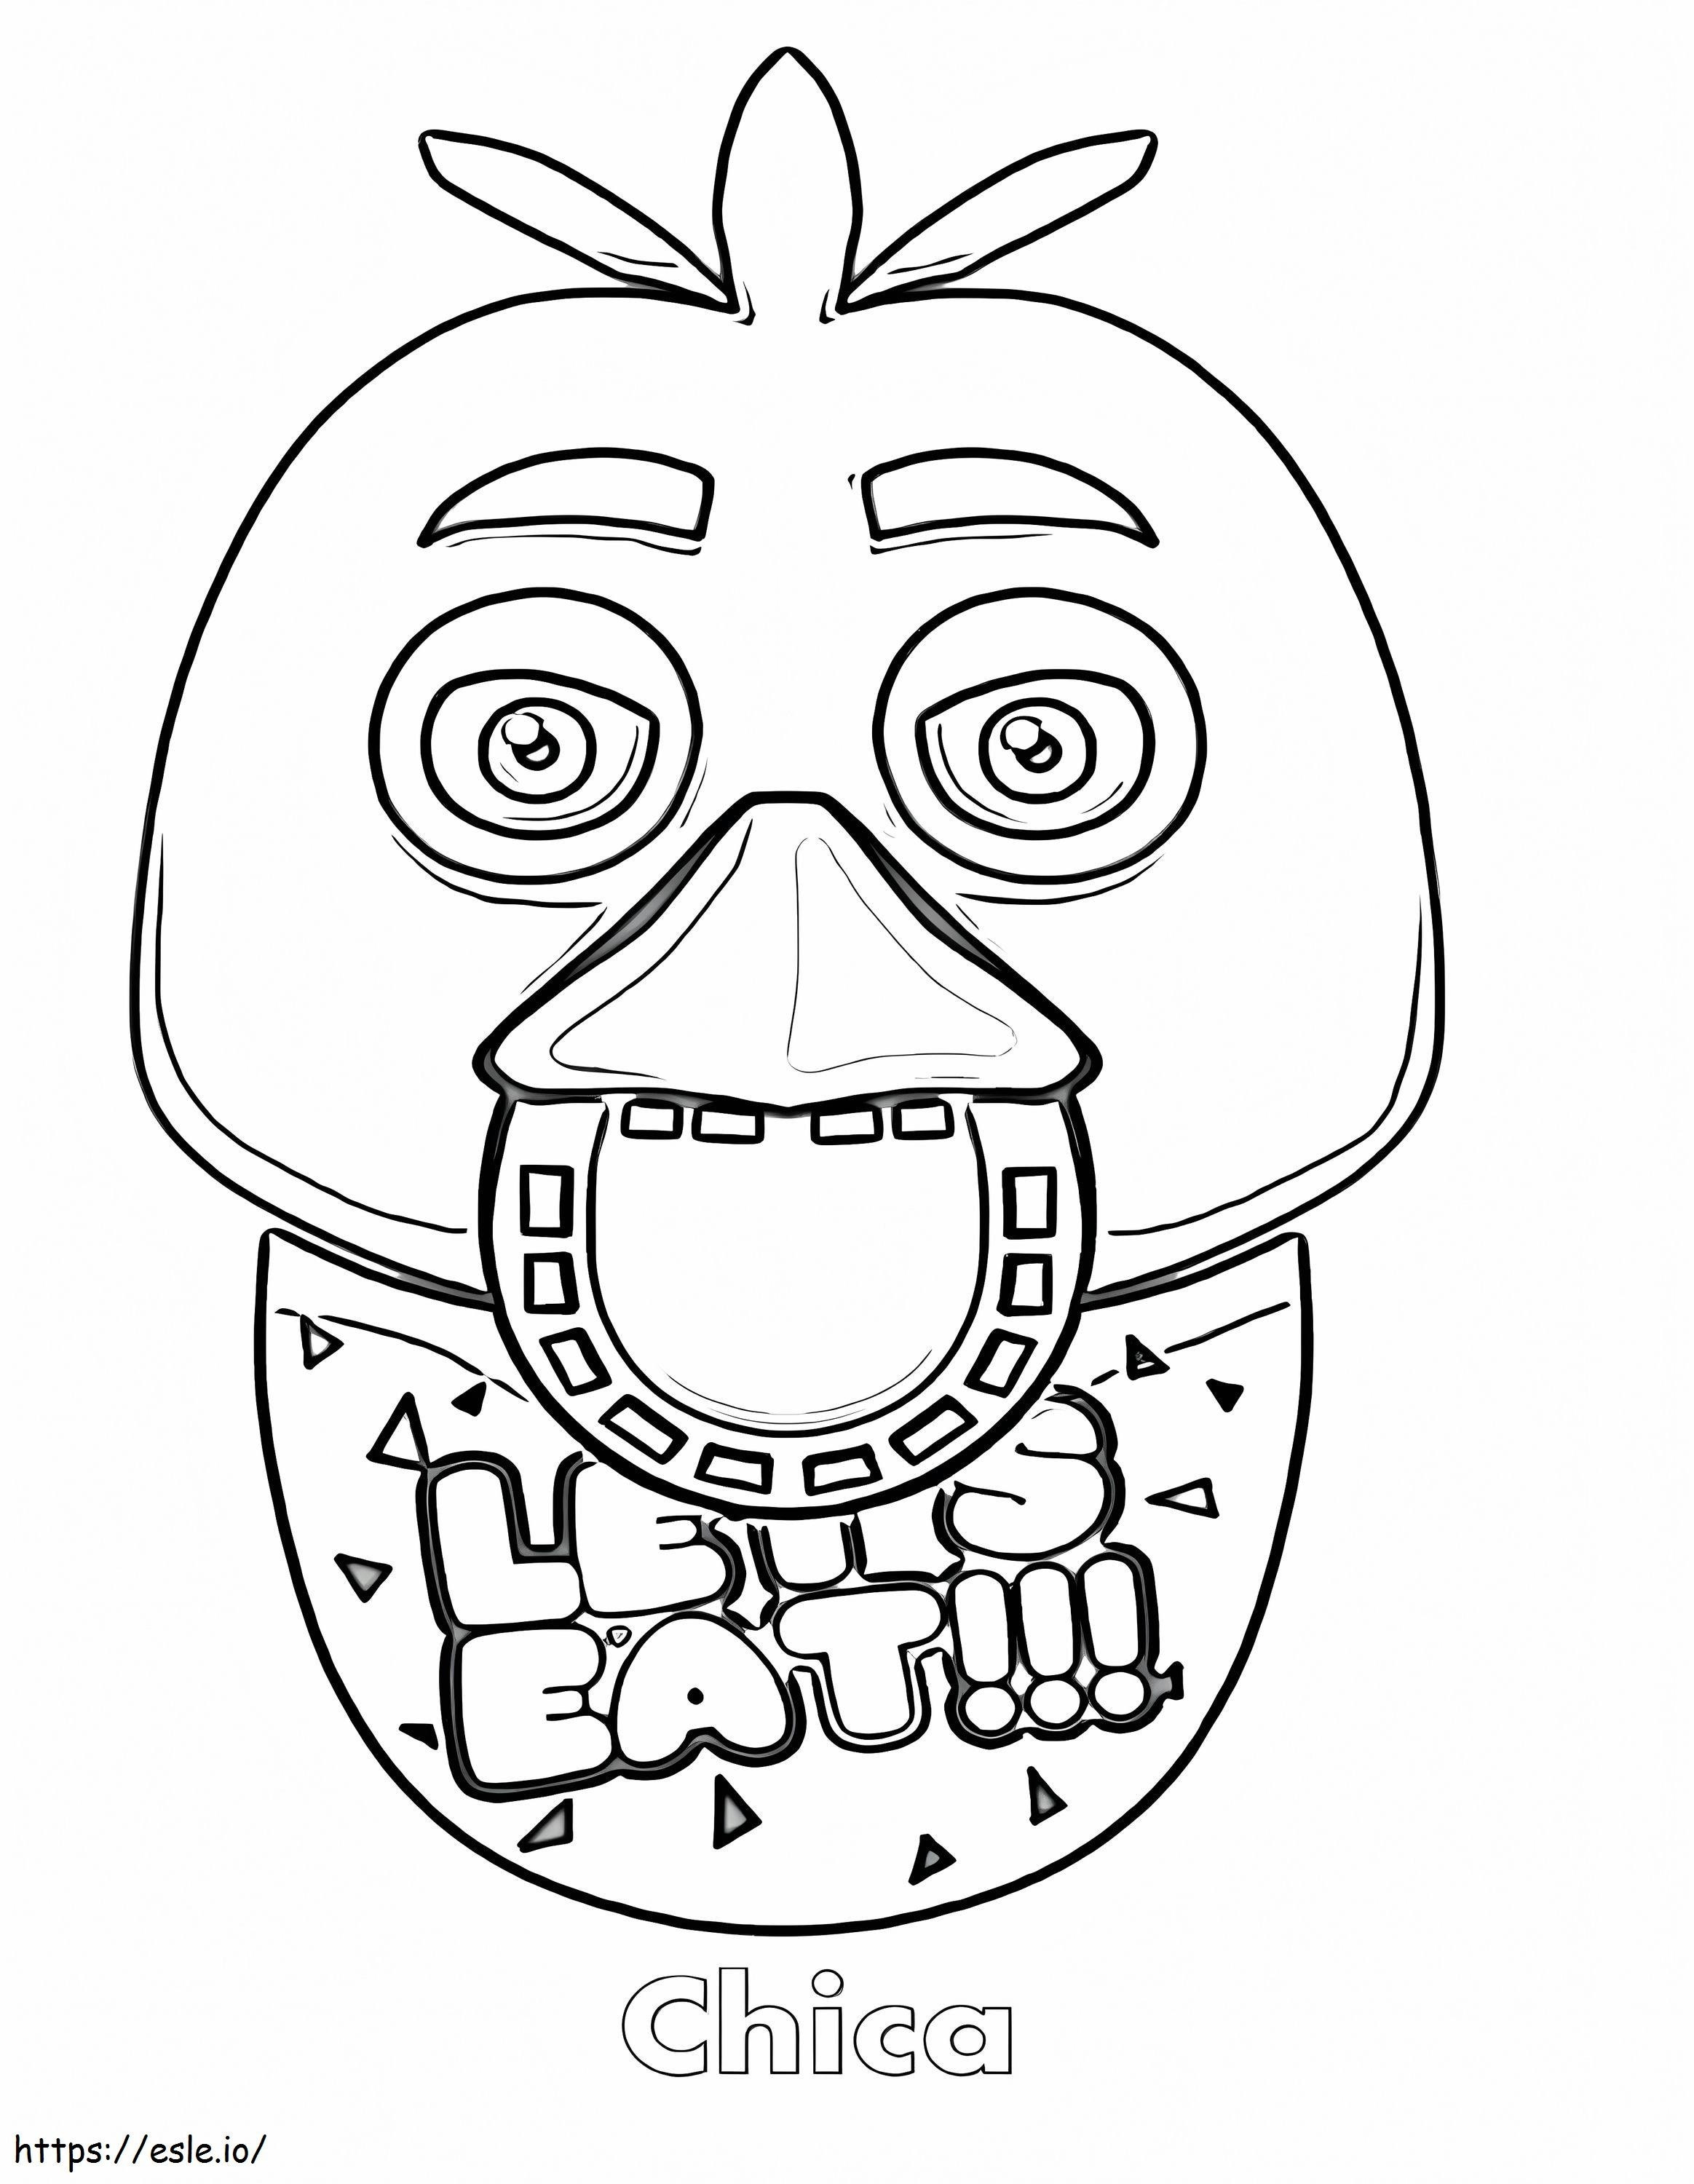 Chica Face 5 Nights At Freddys coloring page